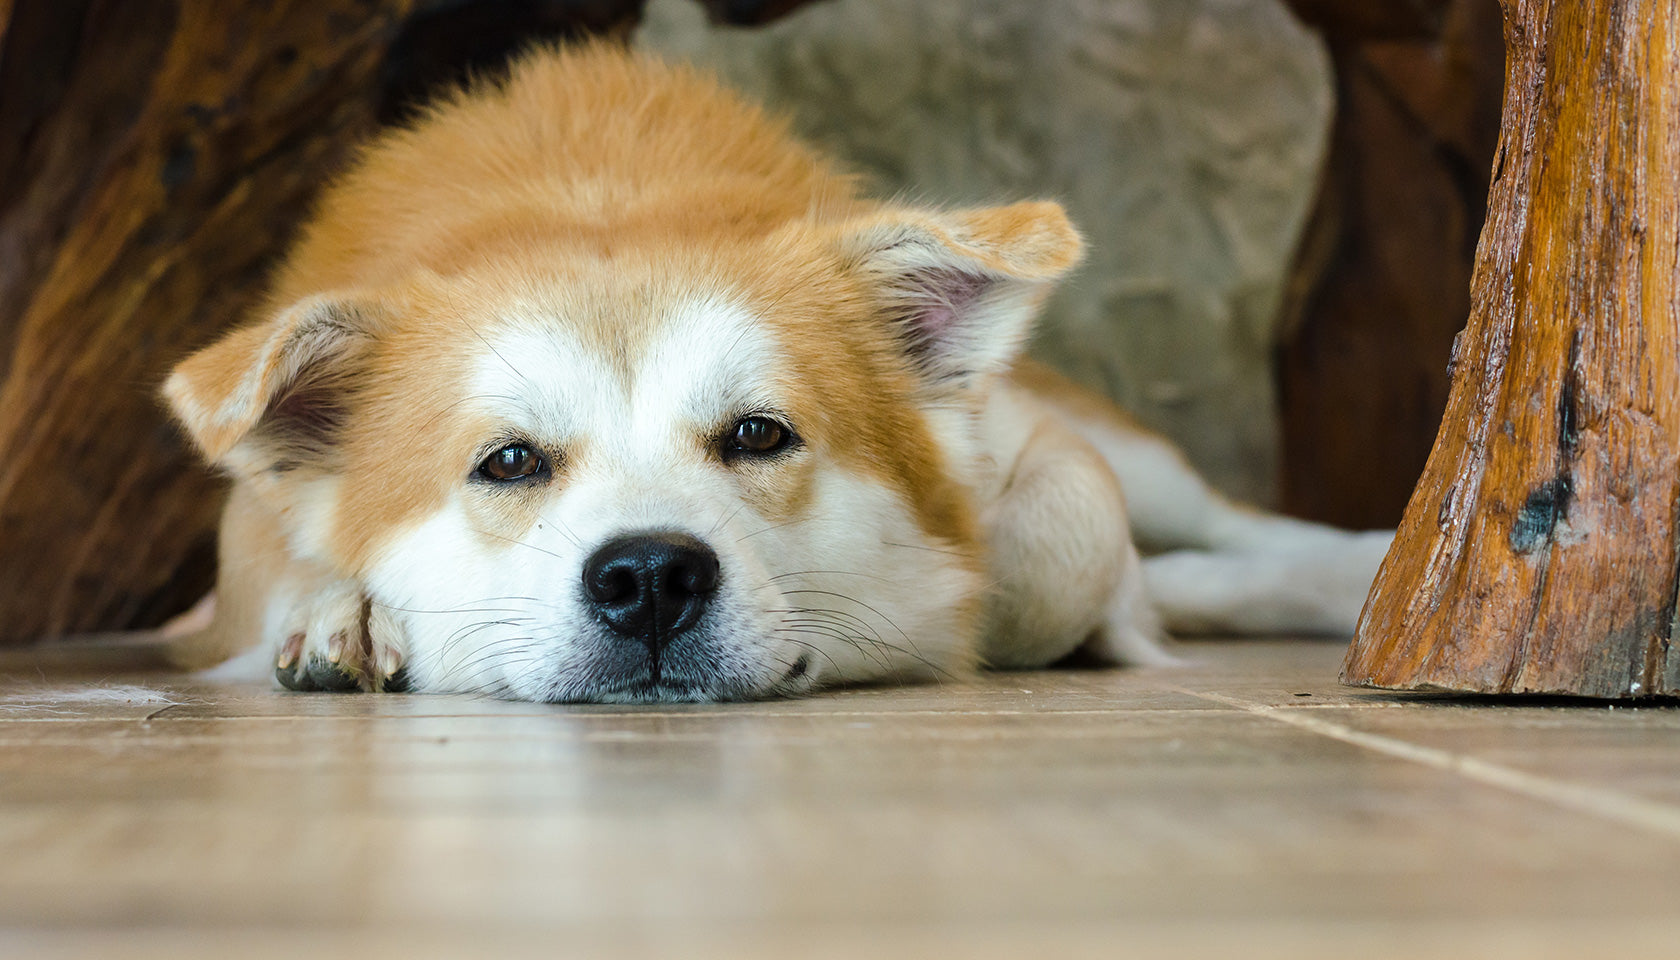 14 Tricks To Stop Your Dog Slipping And Sliding On Hard Floors